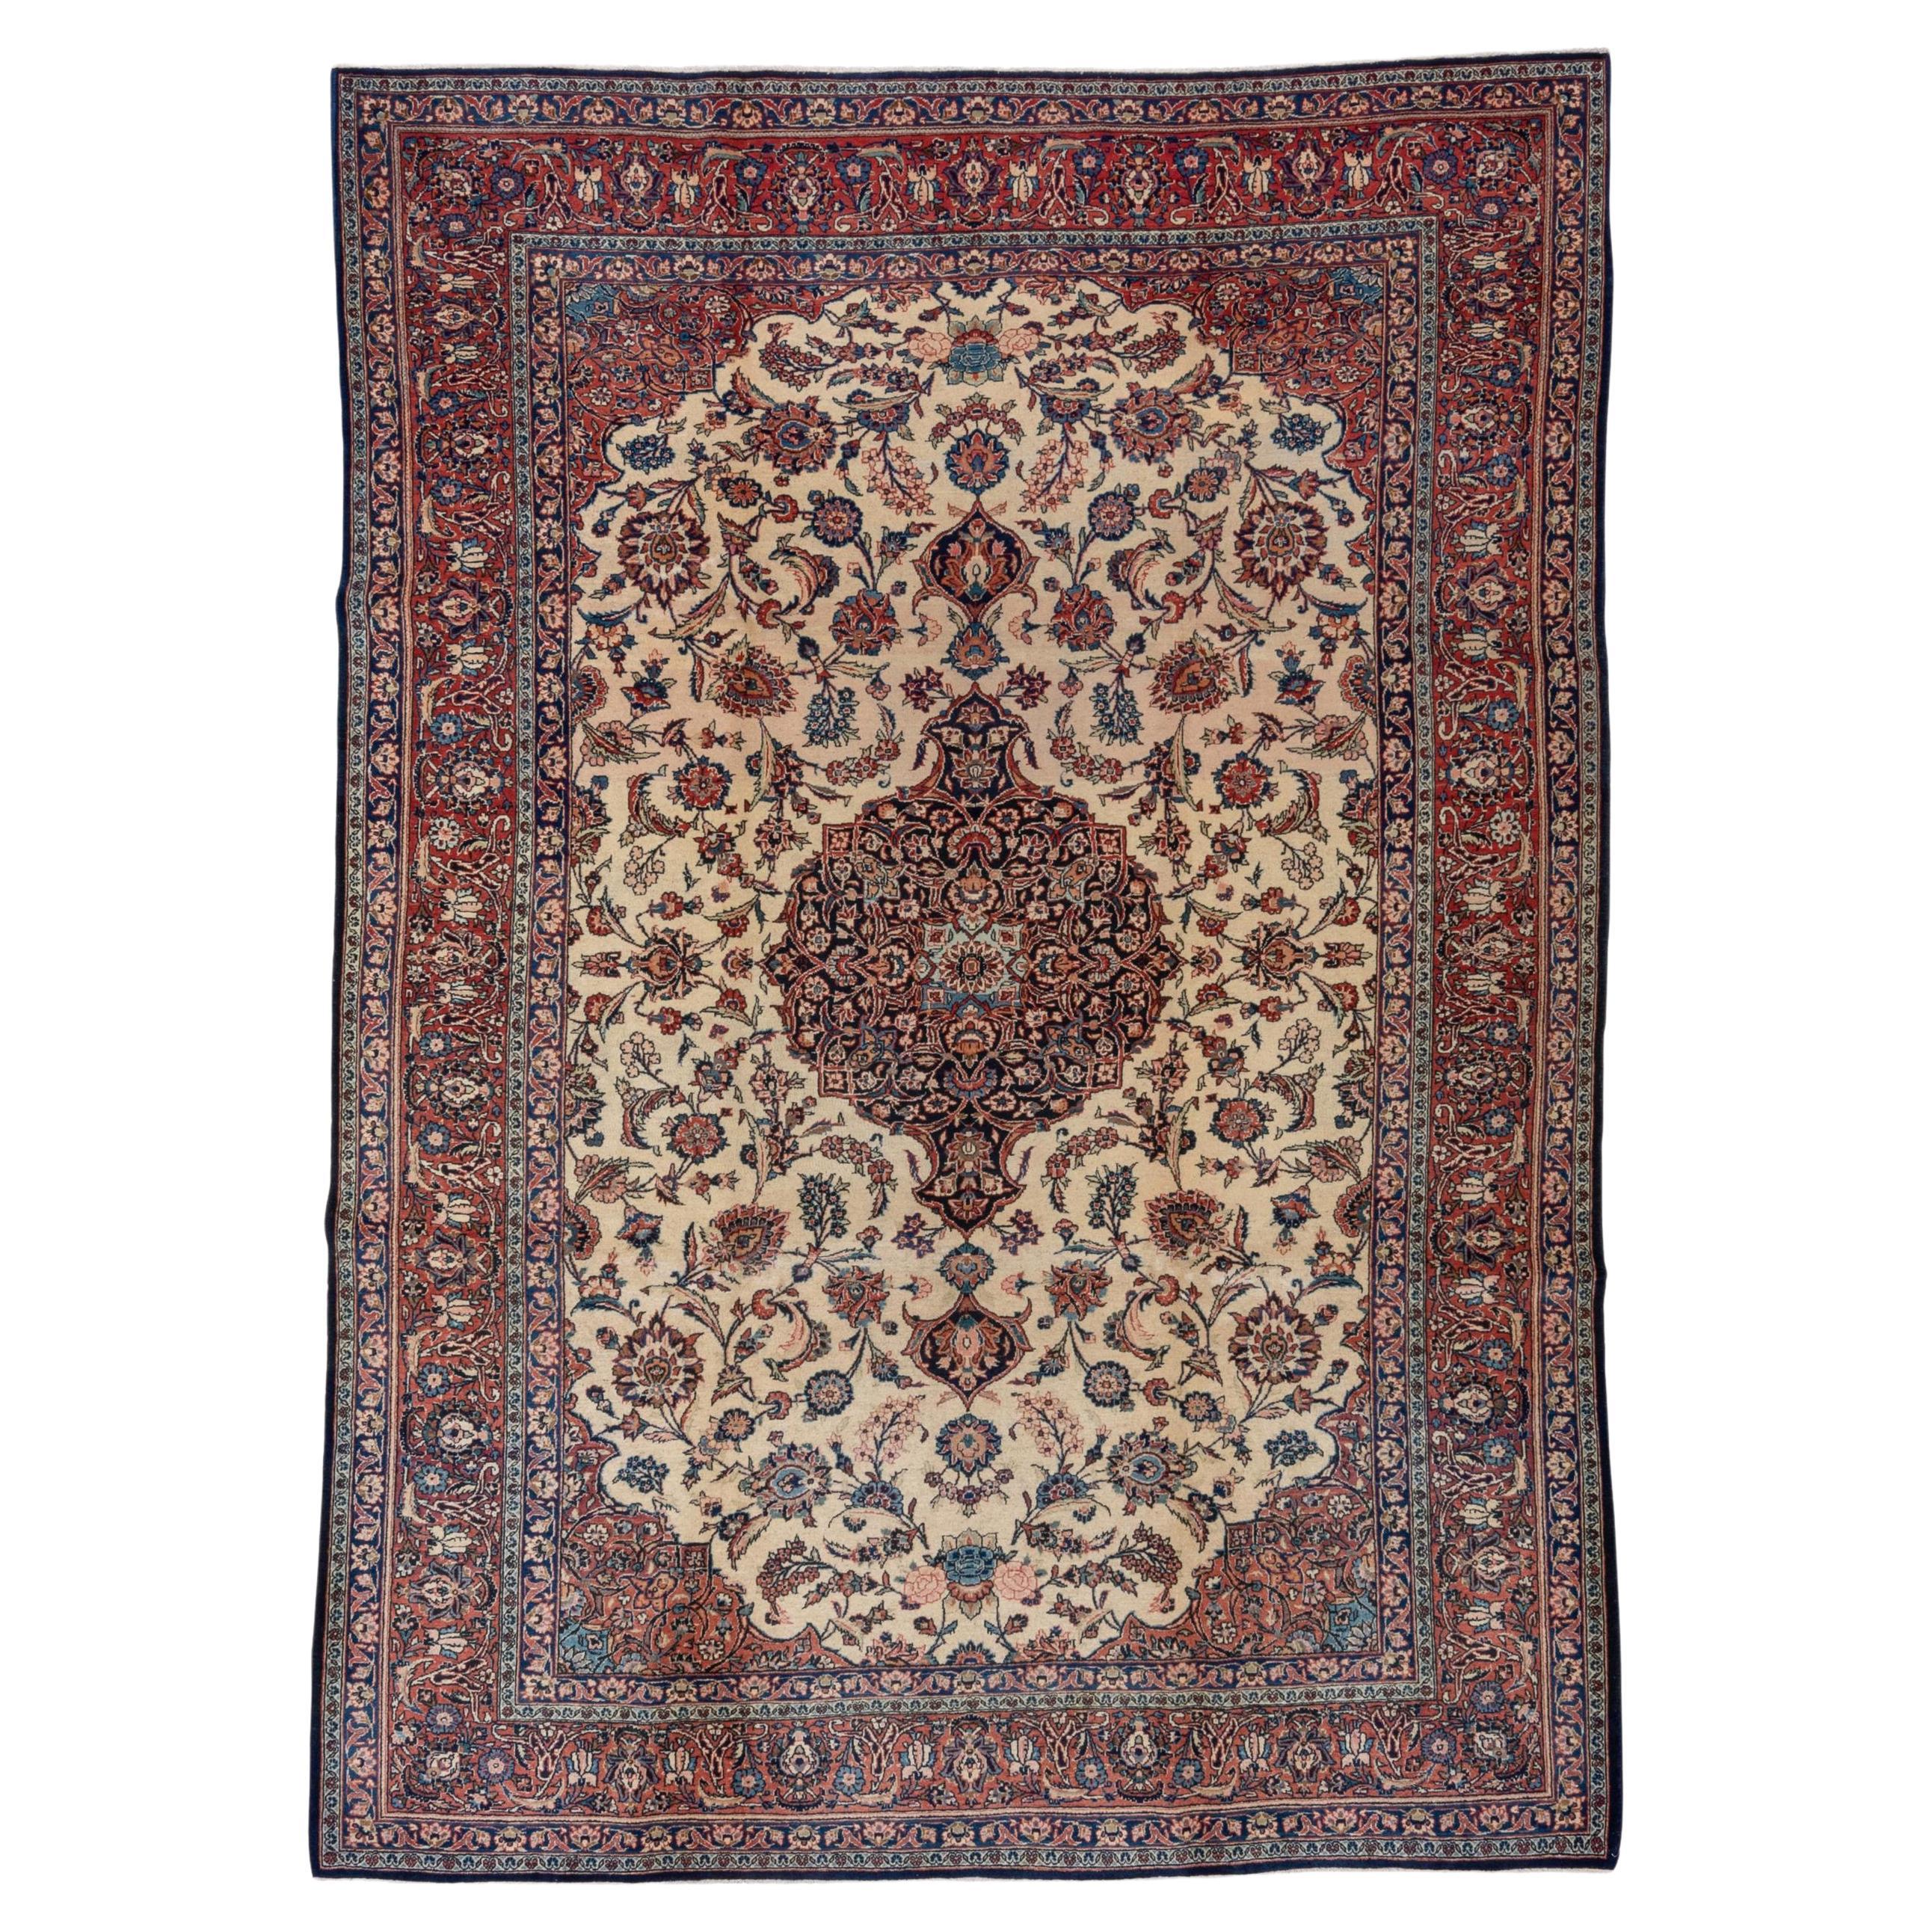 Classic Antique Persian Kashan Rug, Floral Field with a Center Medallion For Sale